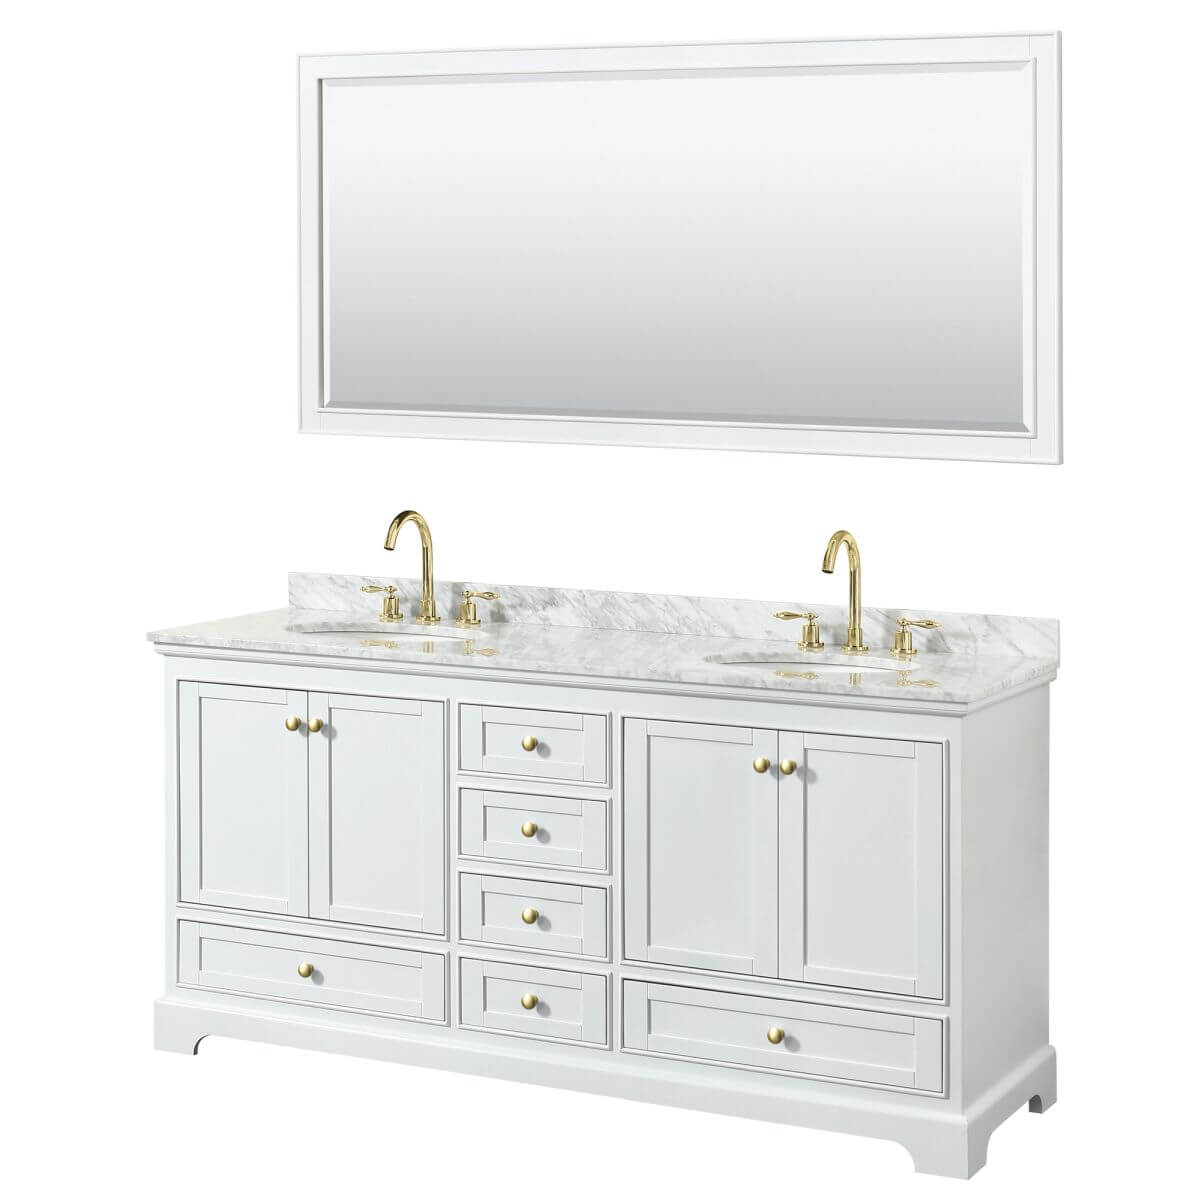 Wyndham Collection Deborah 72 inch Double Bathroom Vanity in White with White Carrara Marble Countertop, Undermount Oval Sinks, Brushed Gold Trim and 70 inch Mirror - WCS202072DWGCMUNOM70